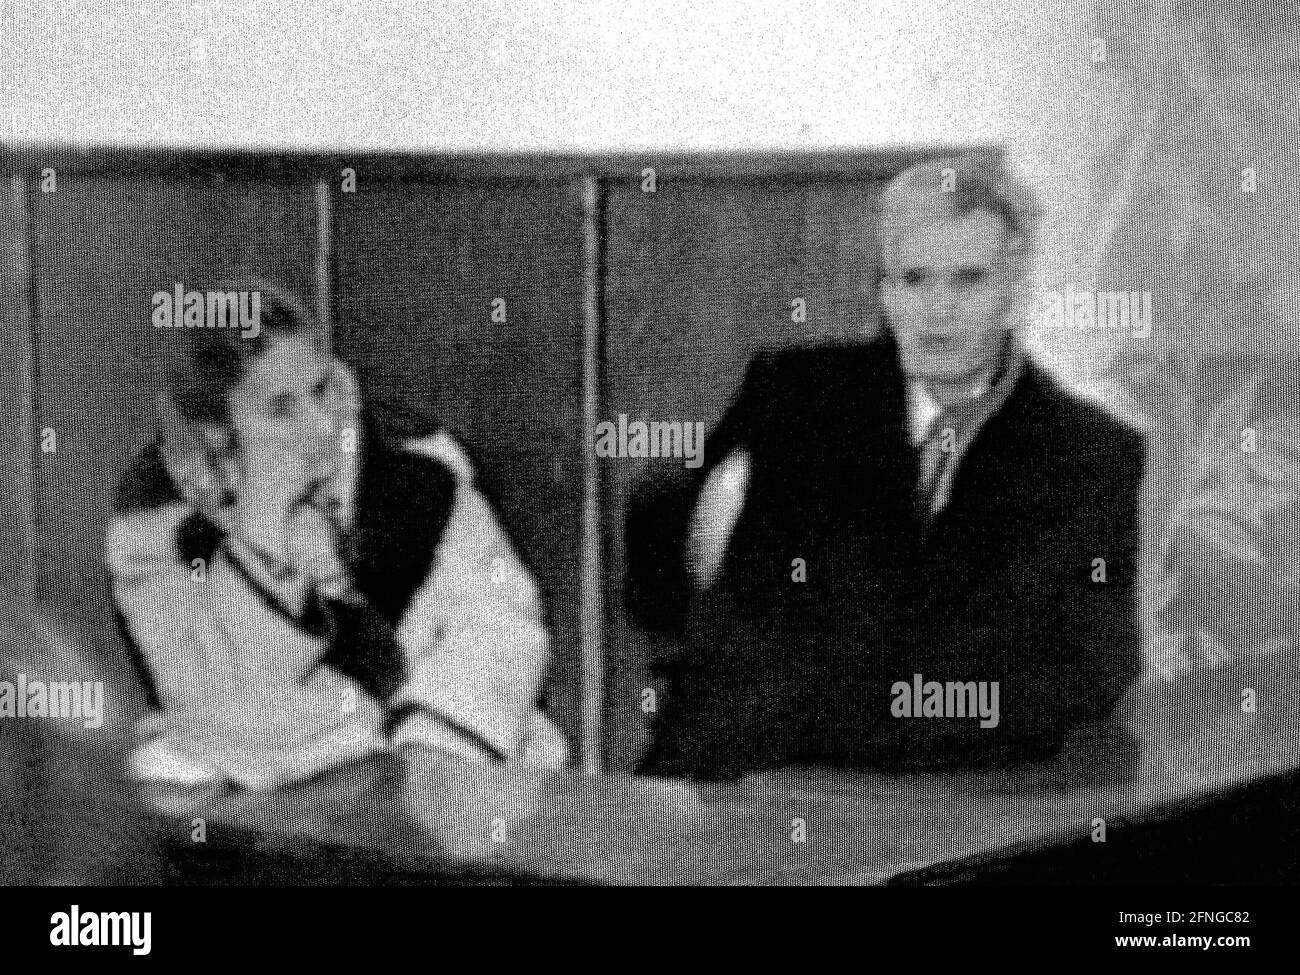 Romania, Bucharest, 25.12.1989. Archive-No.: 12-04-10 Ceausescu before military court Photo:Nicolae and Elena Ceausescu before the military court [automated translation] Stock Photo